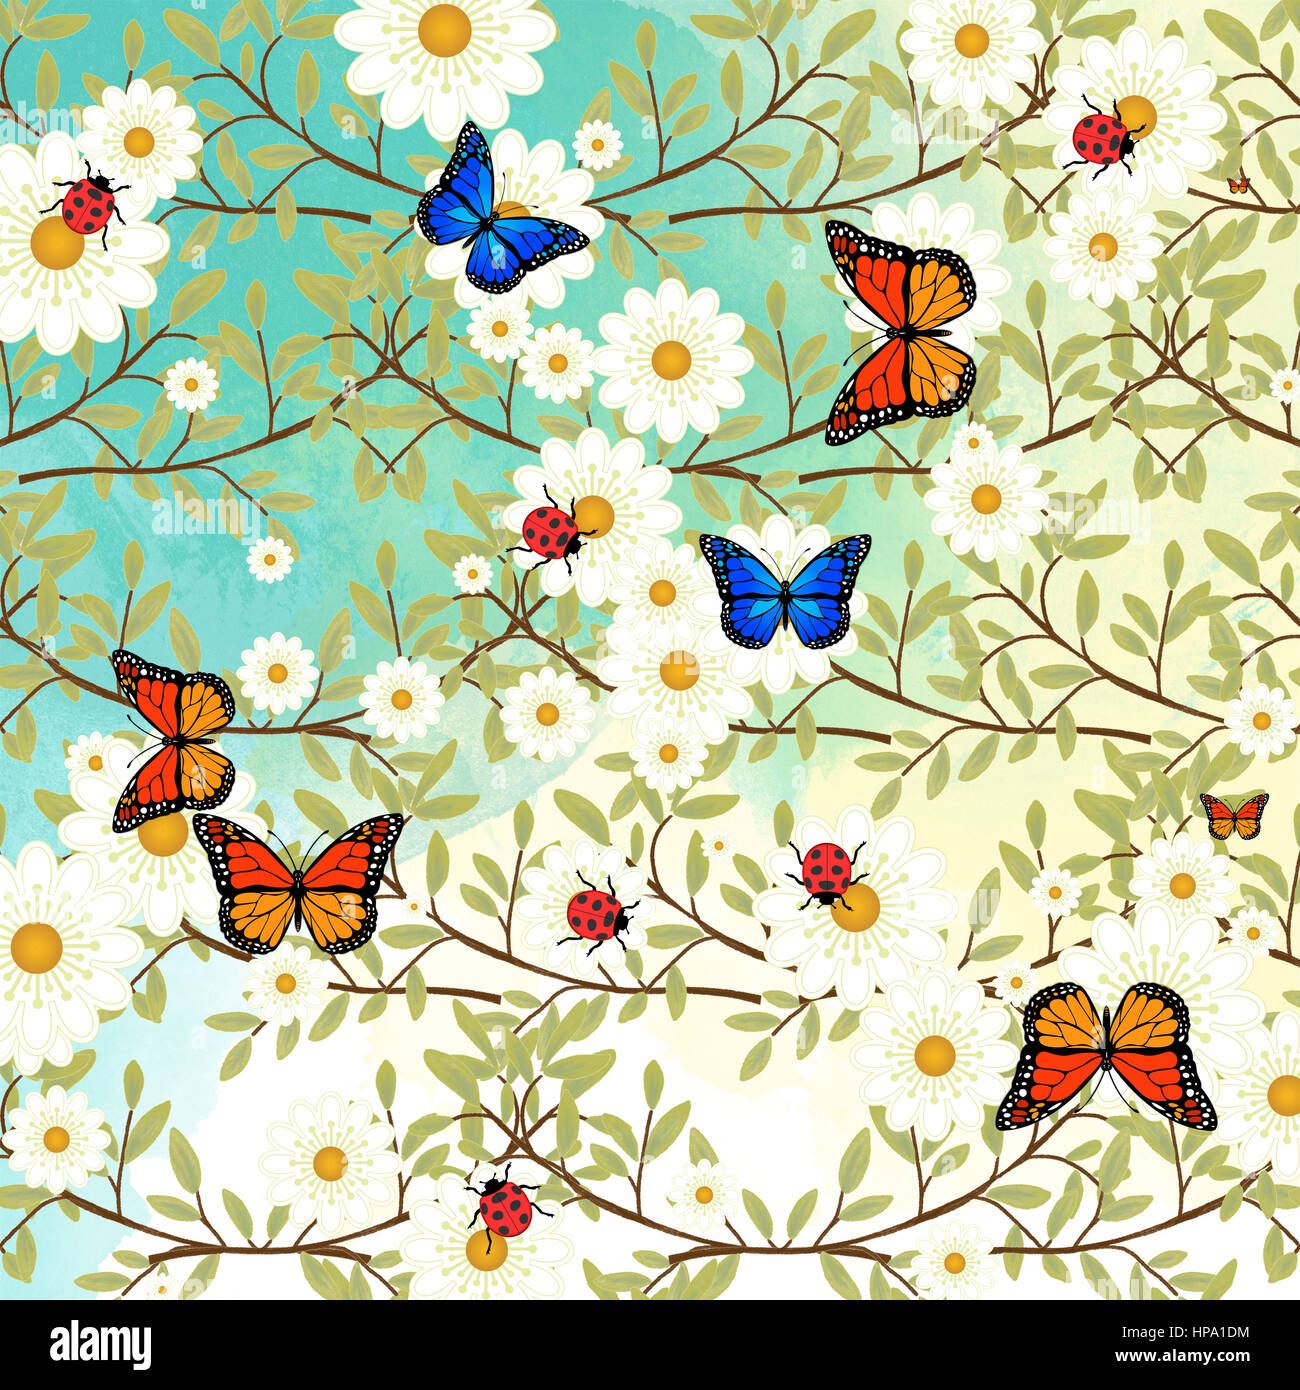 Digital art springtime nature scene with daisies, butterflies and ladybugs on a watercolor background. Stock Photo